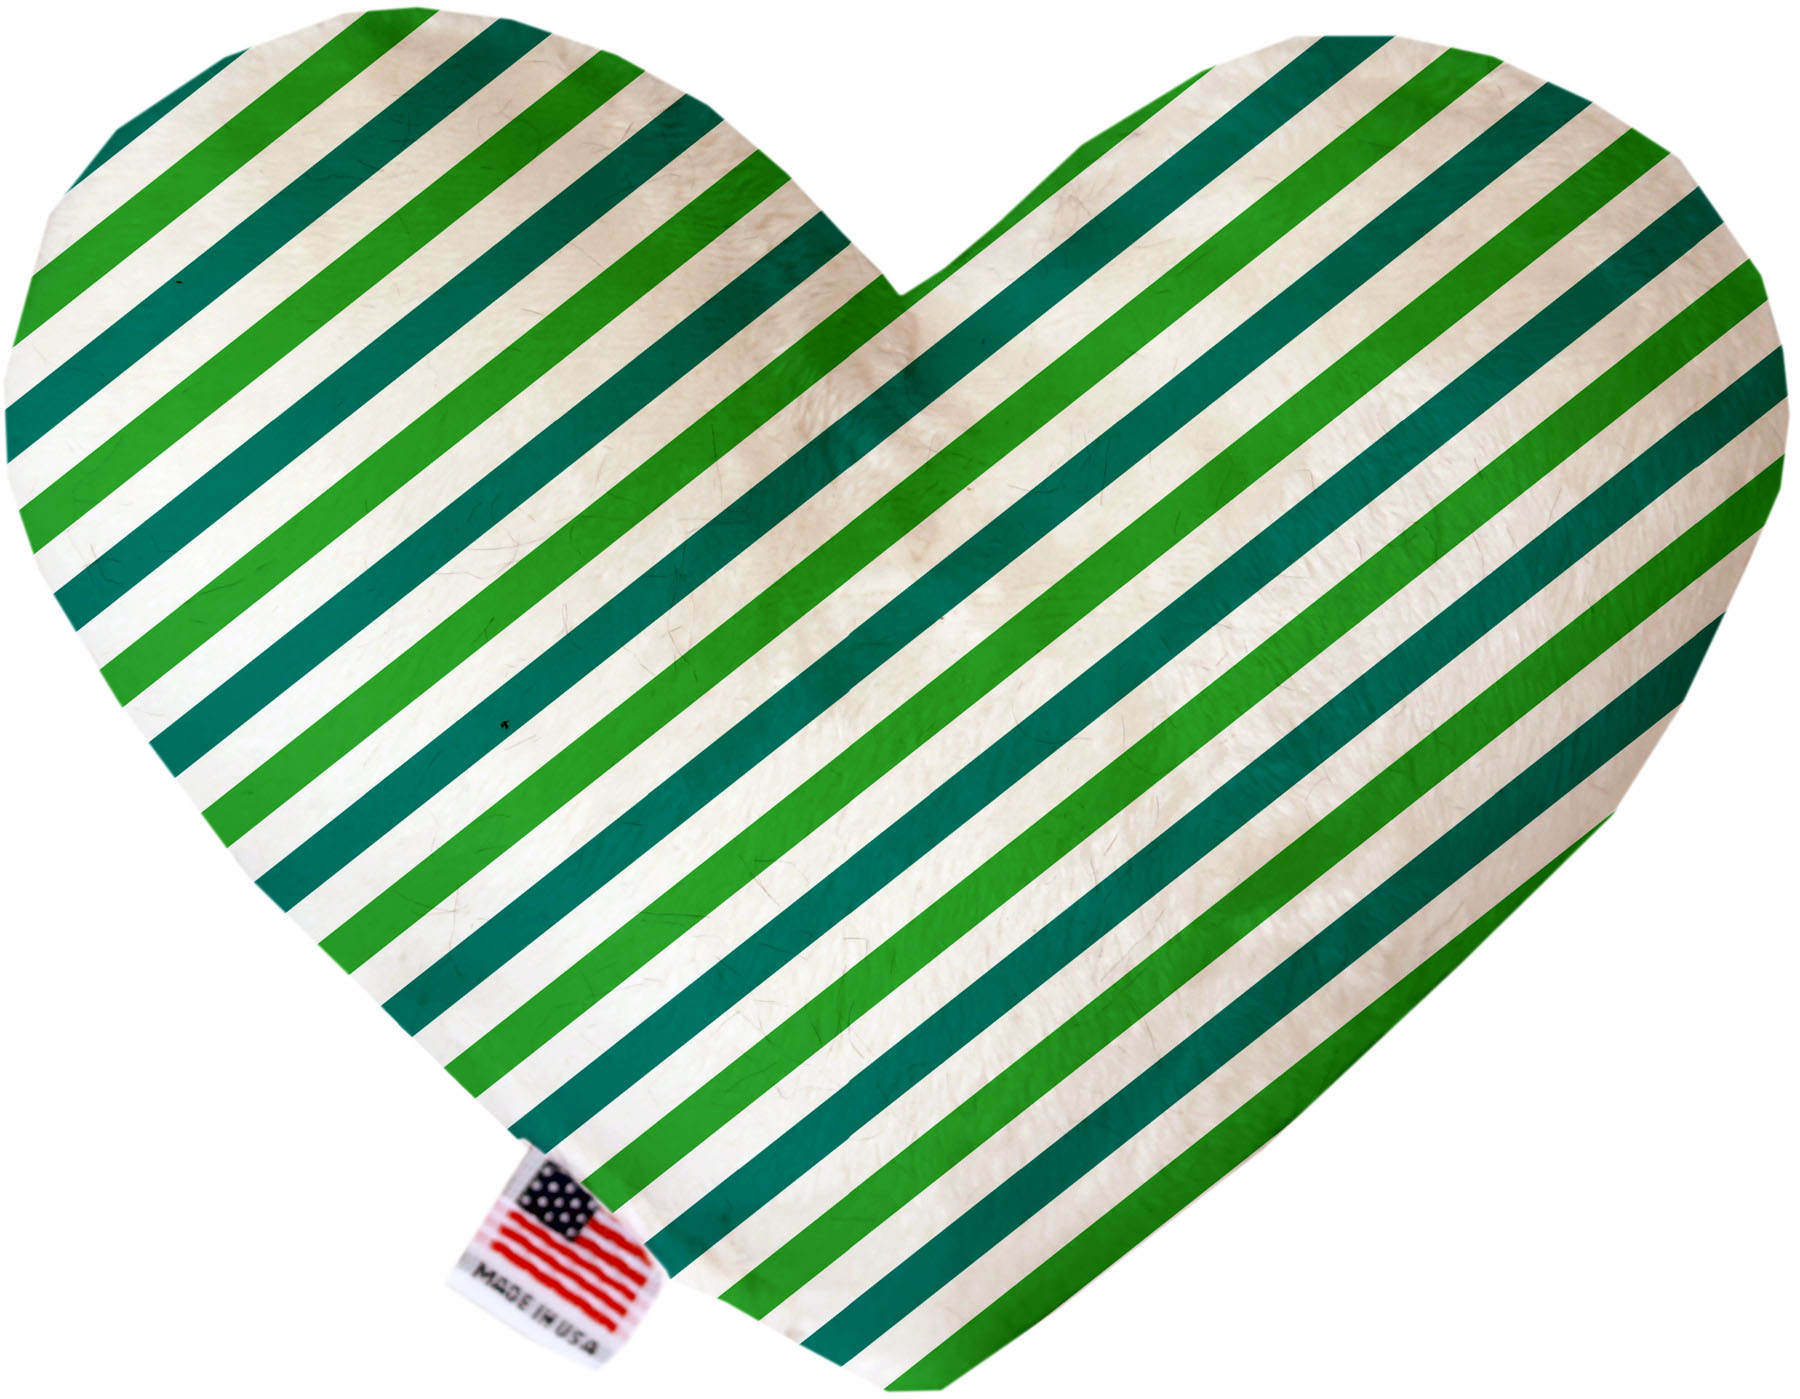 Lucky Stripes 8 inch Heart Dog Toy